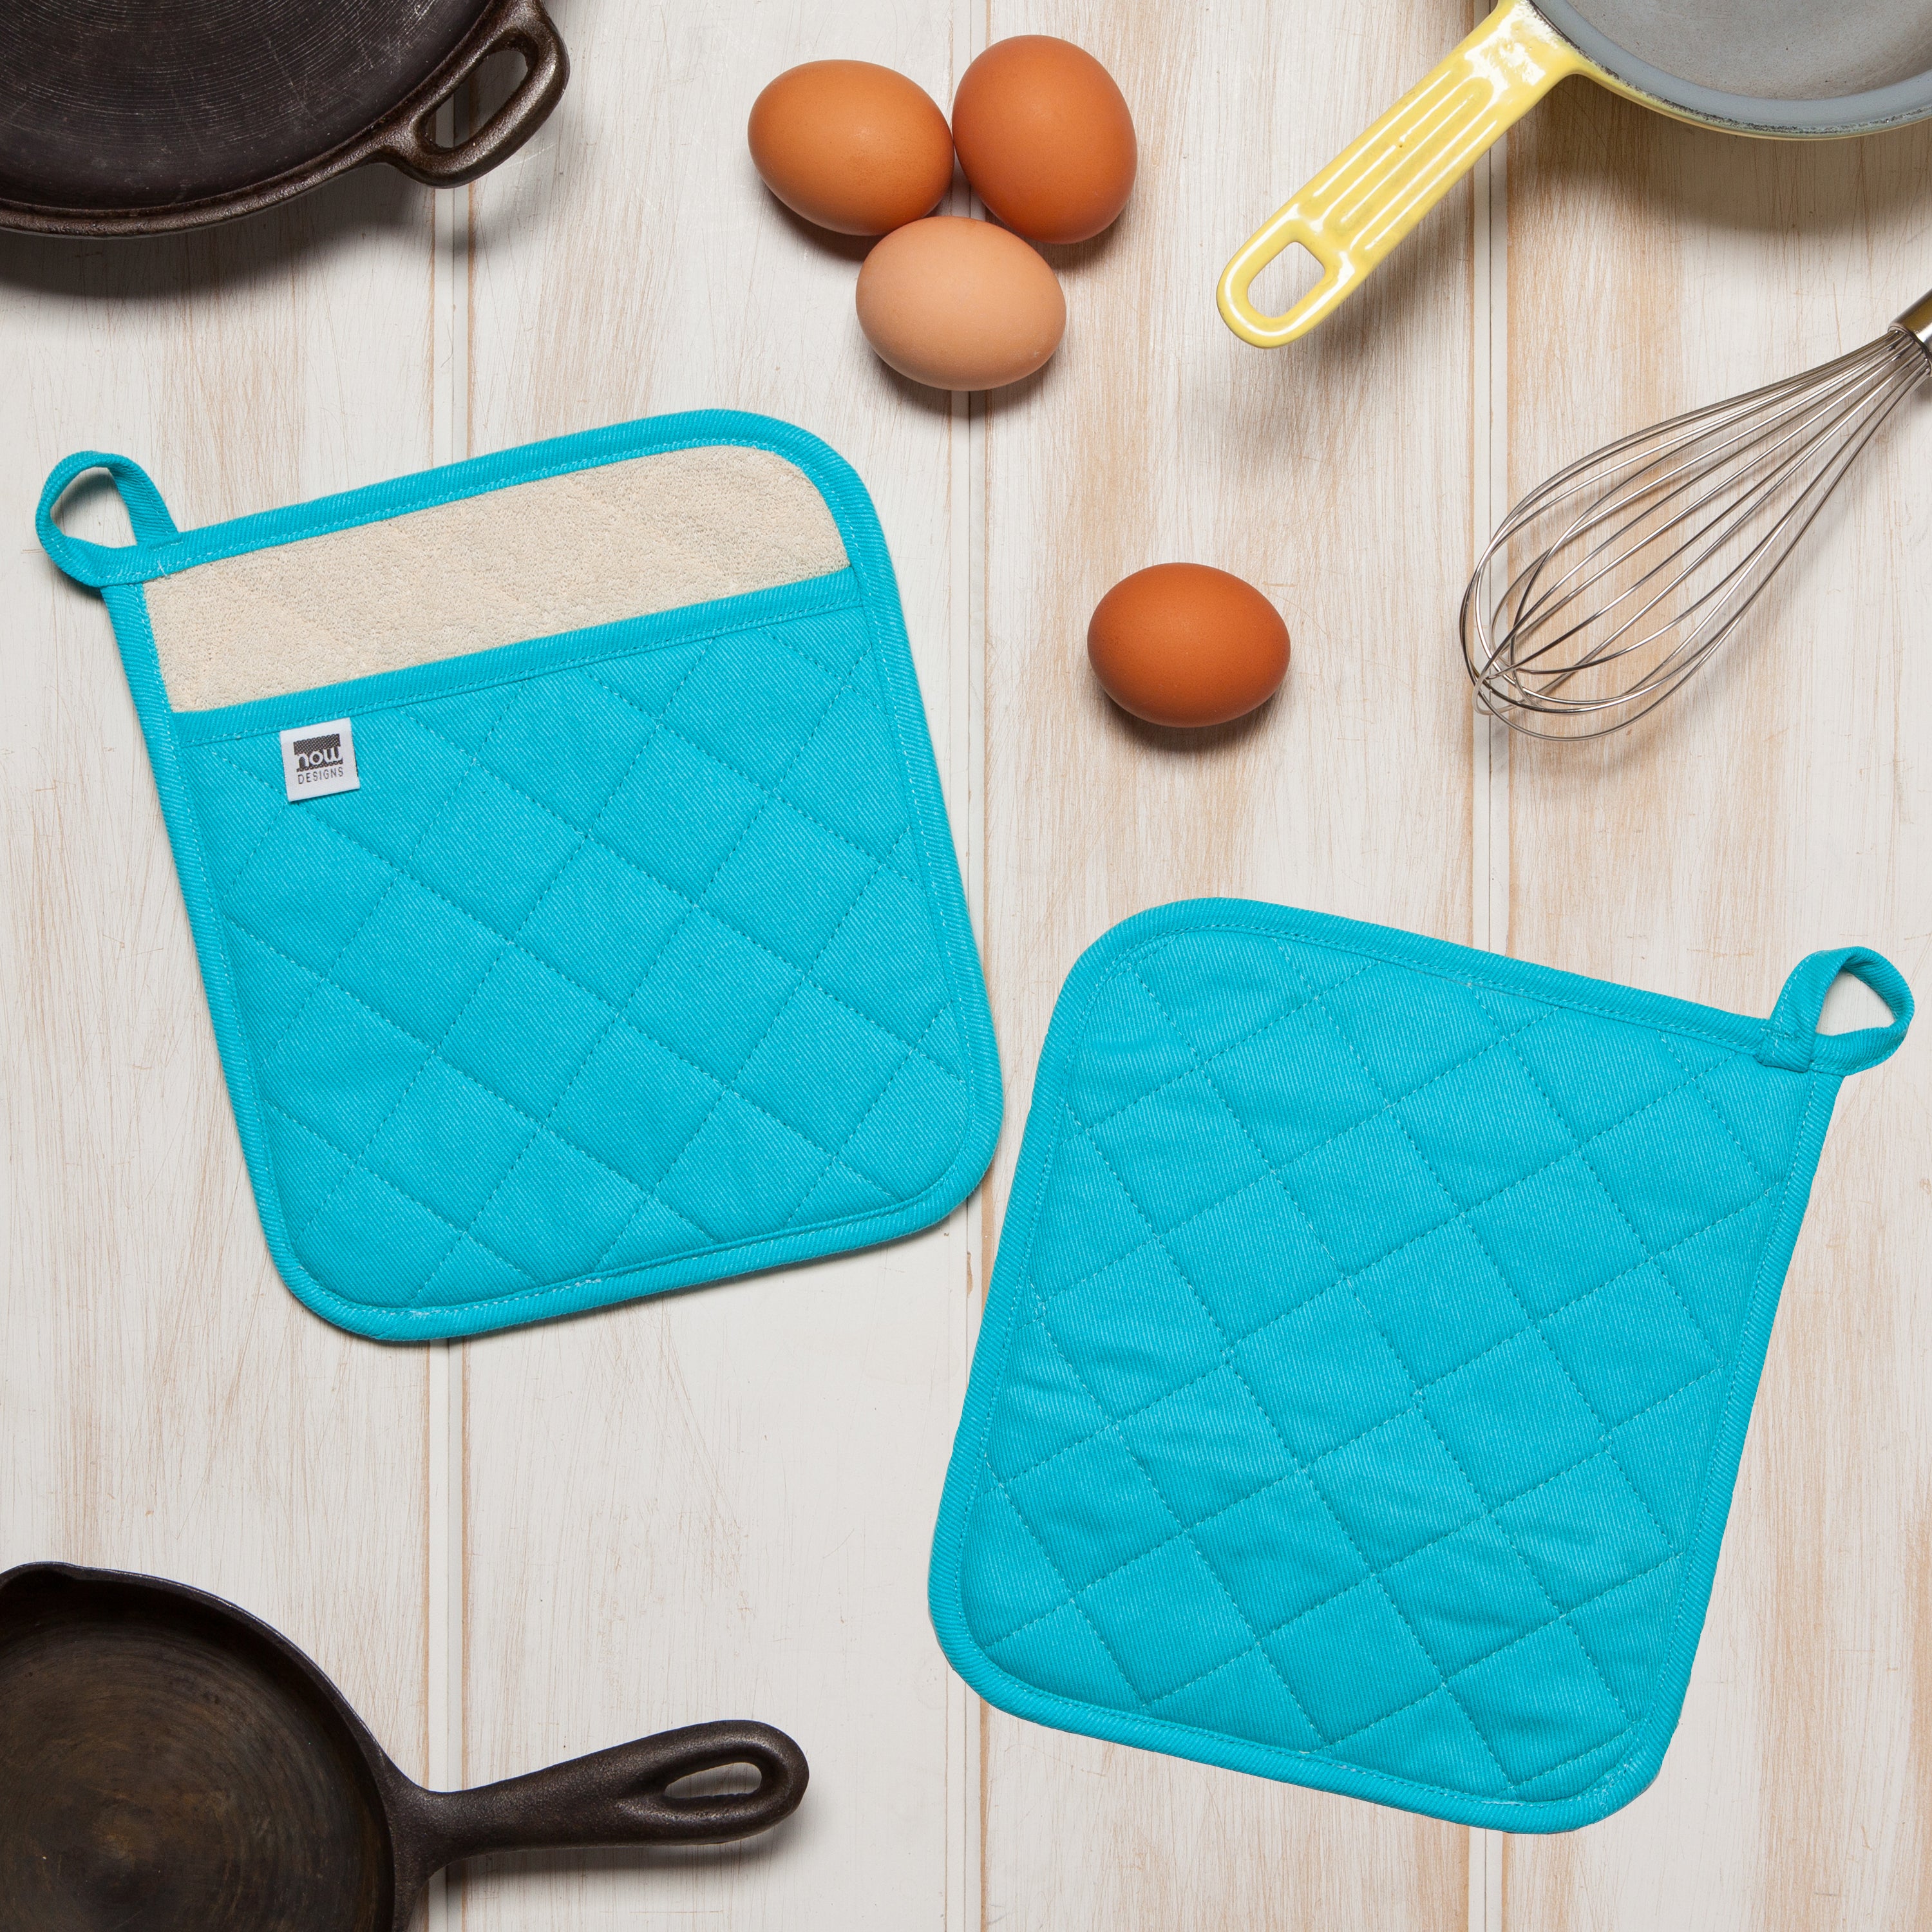 Bali Blue - Superior Potholders by Now Designs®